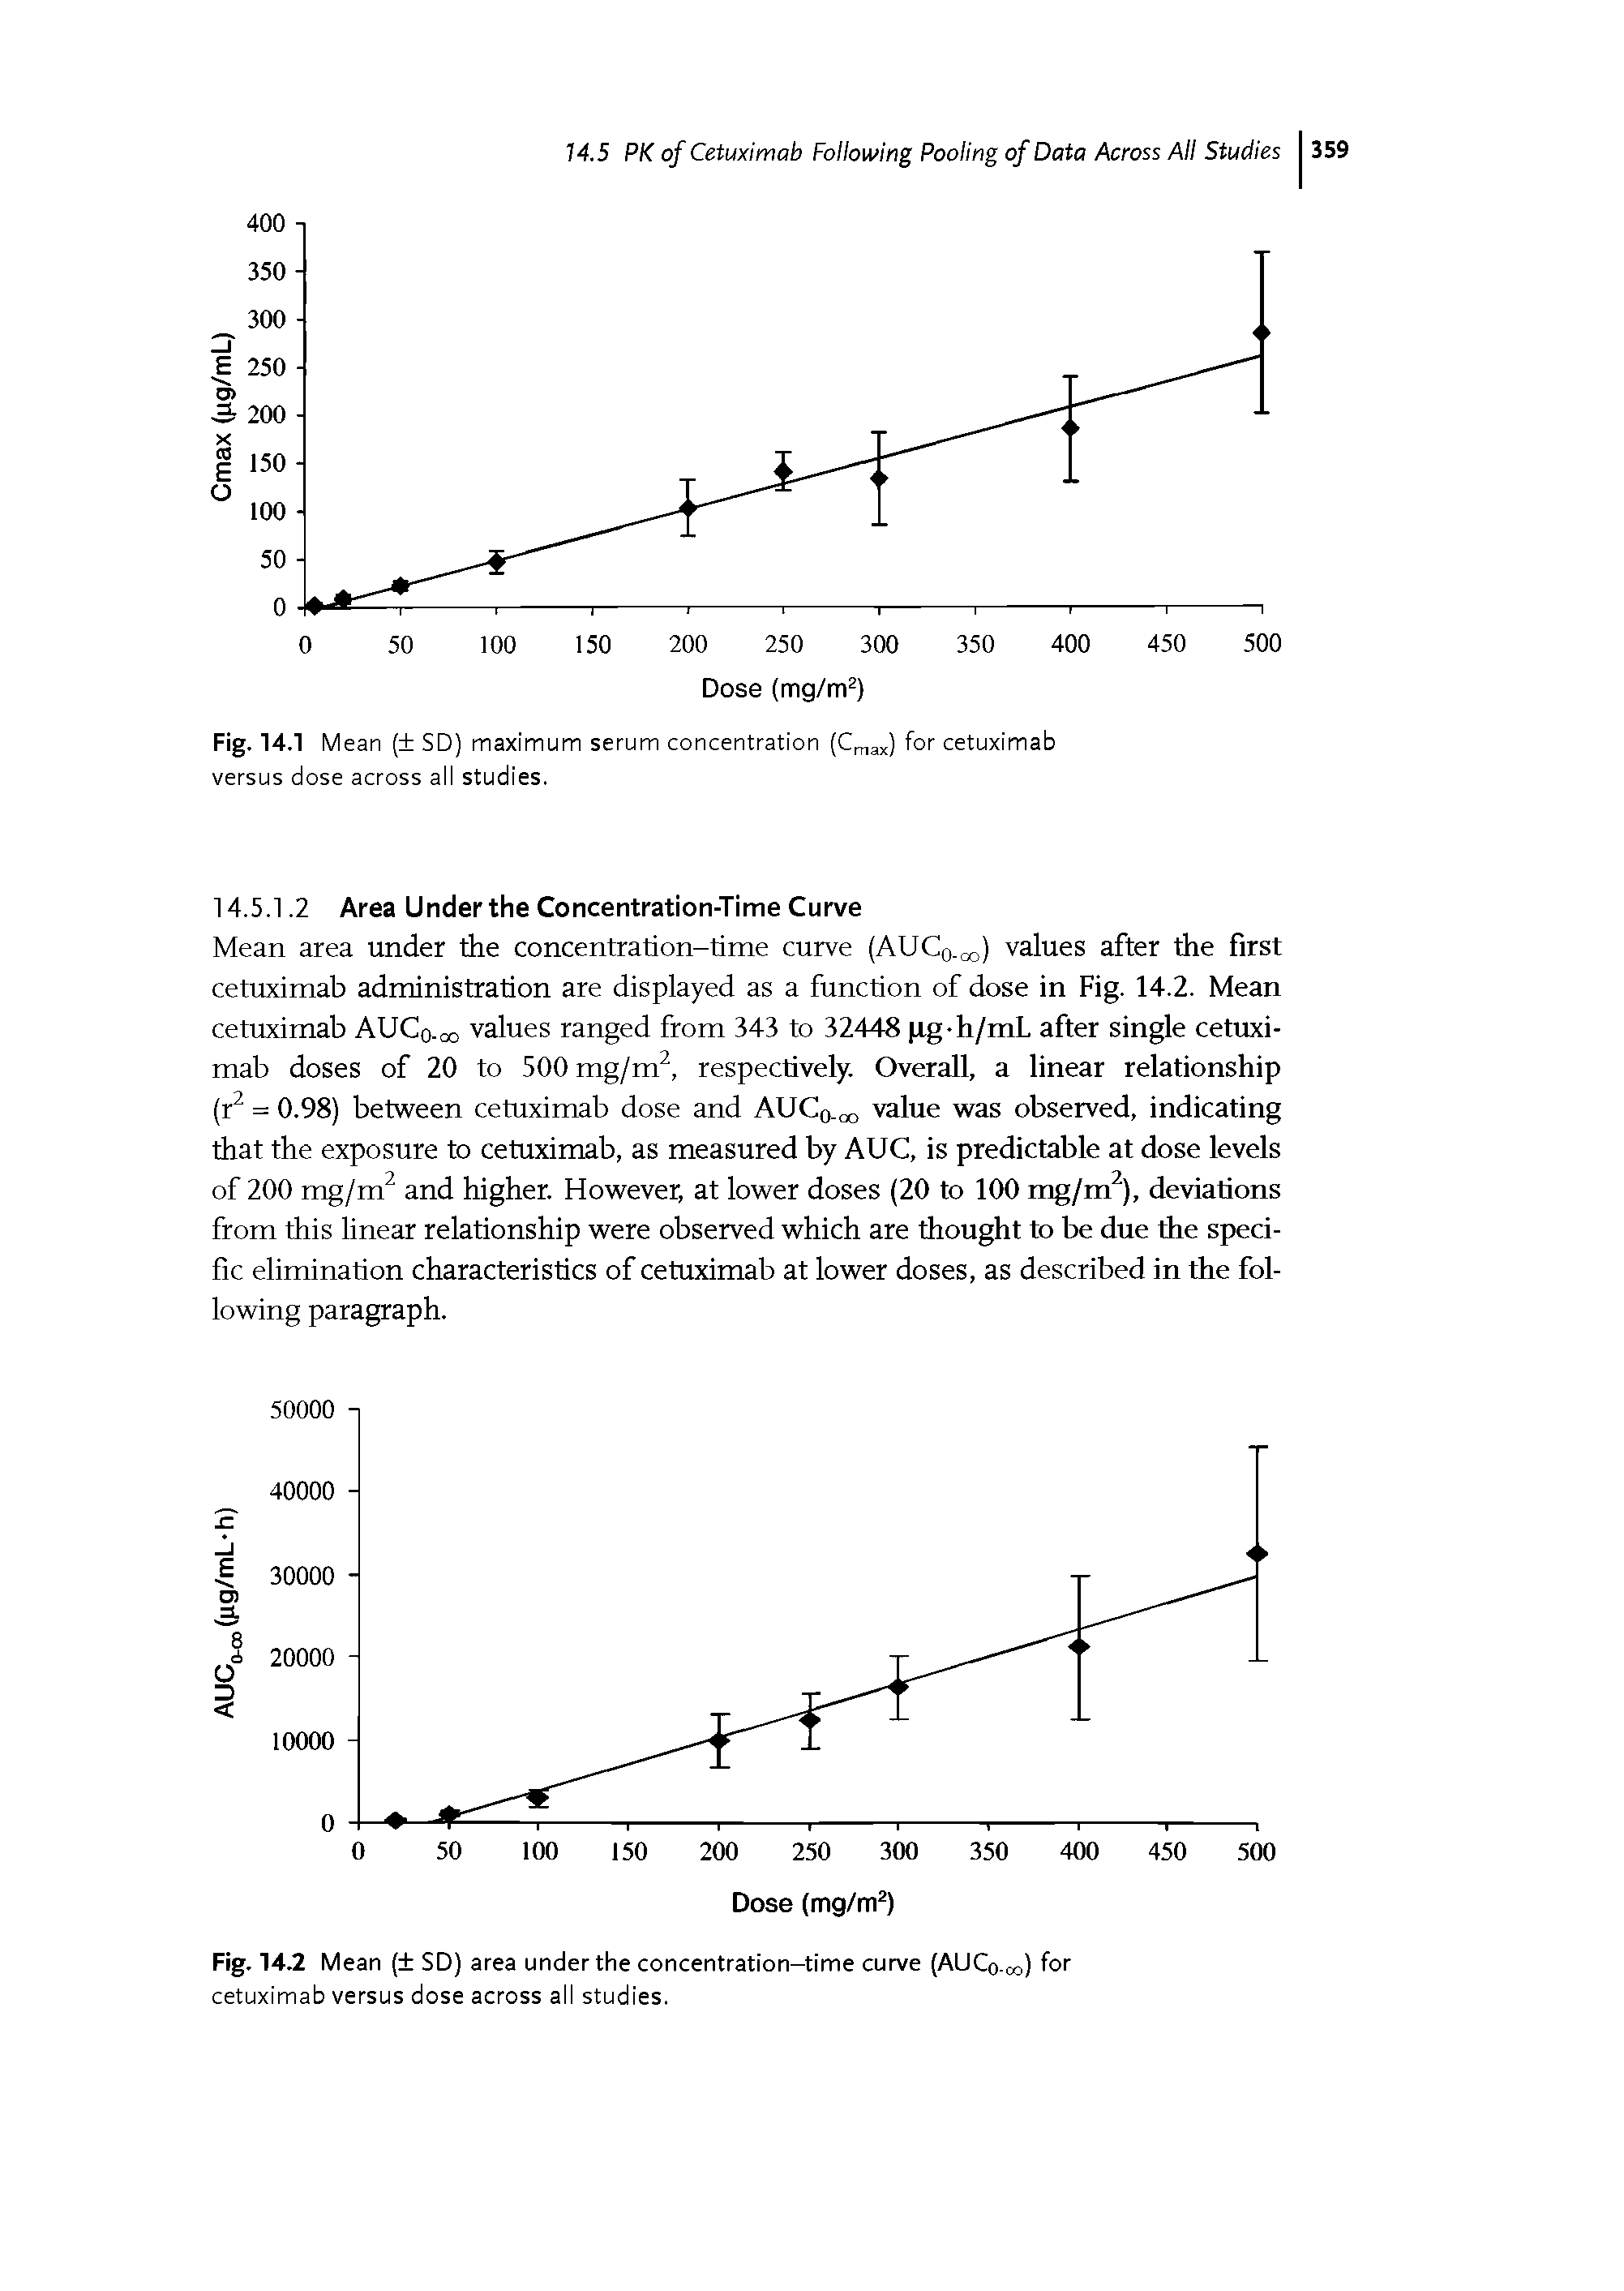 Fig. 14.1 Mean ( SD) maximum serum concentration (Cmax) for cetuximab versus dose across all studies.